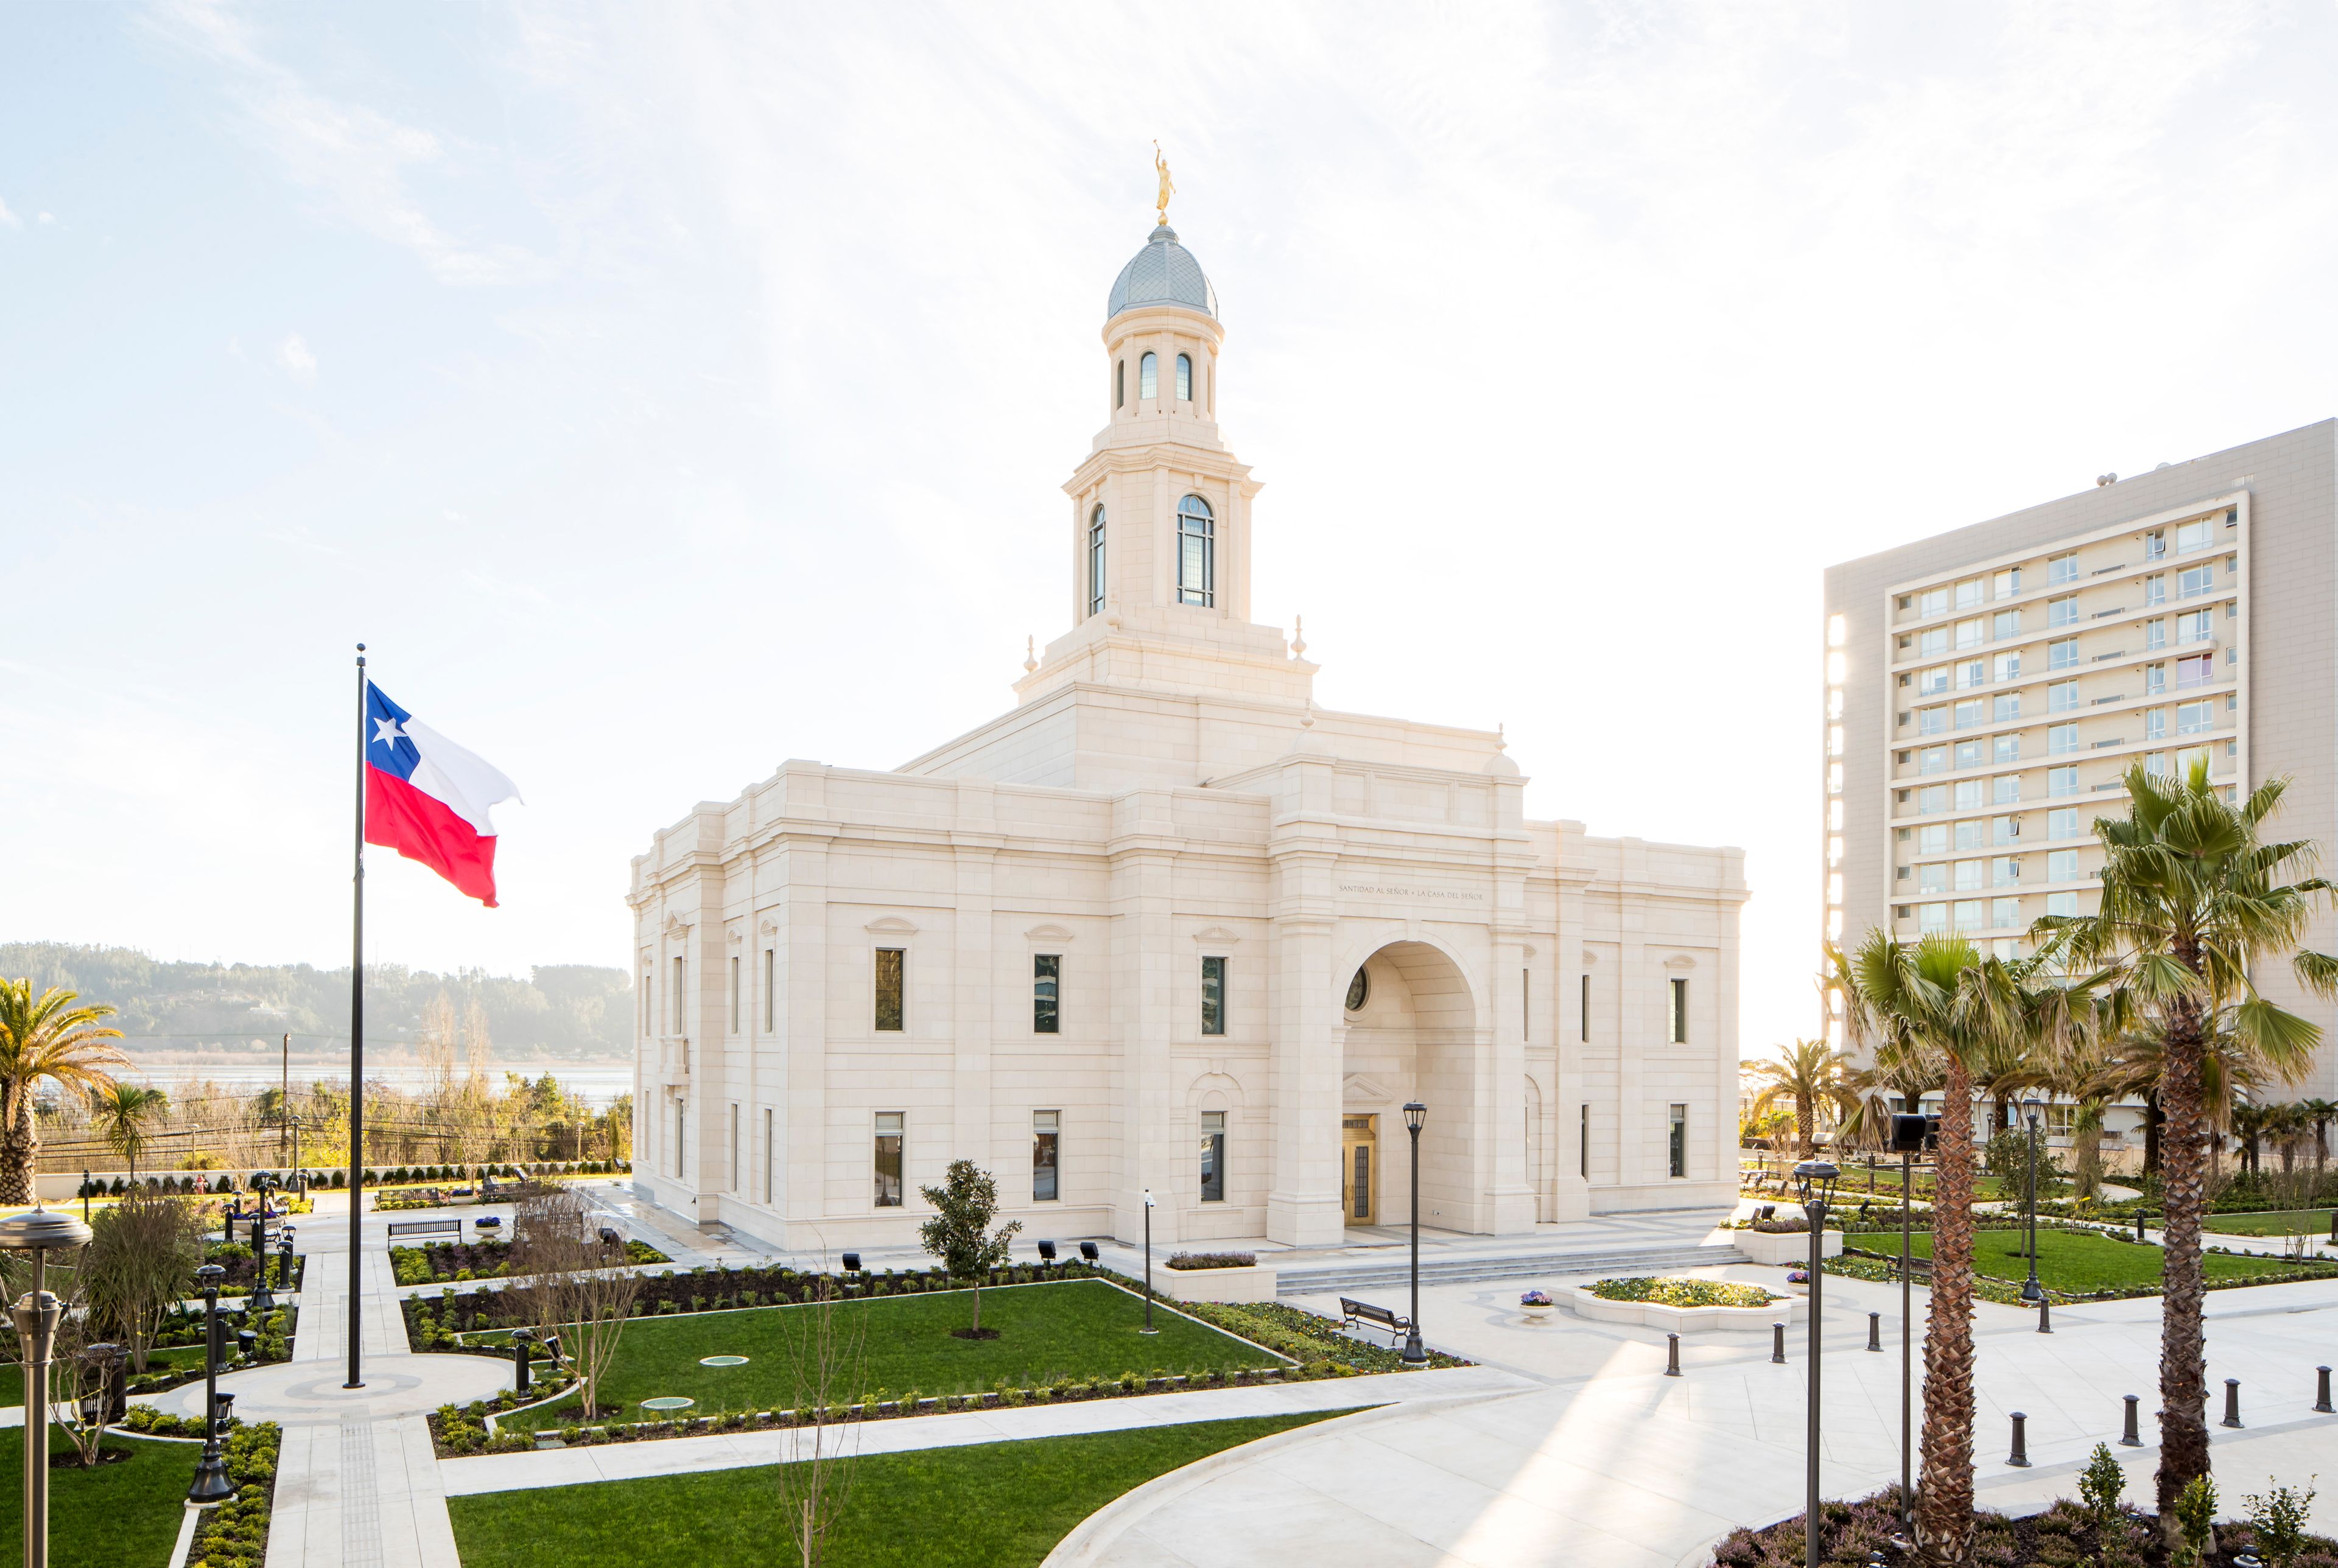 A full view of the Concepción Chile Temple with the Chilean flag displayed on the grounds.